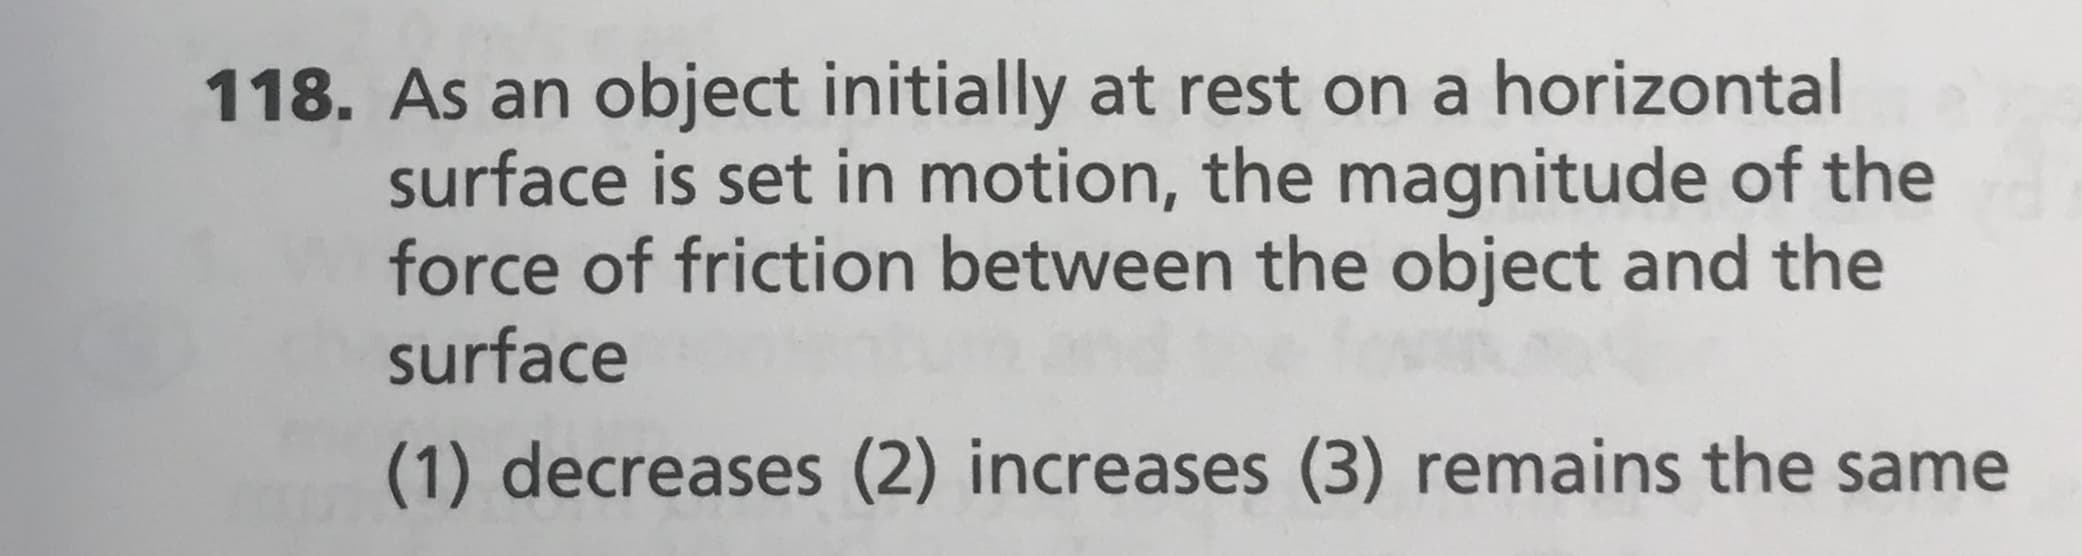 118. As an object initially at rest on a horizontal
surface is set in motion, the magnitude of the
force of friction between the object and the
surface
(1) decreases (2) increases (3) remains the same
